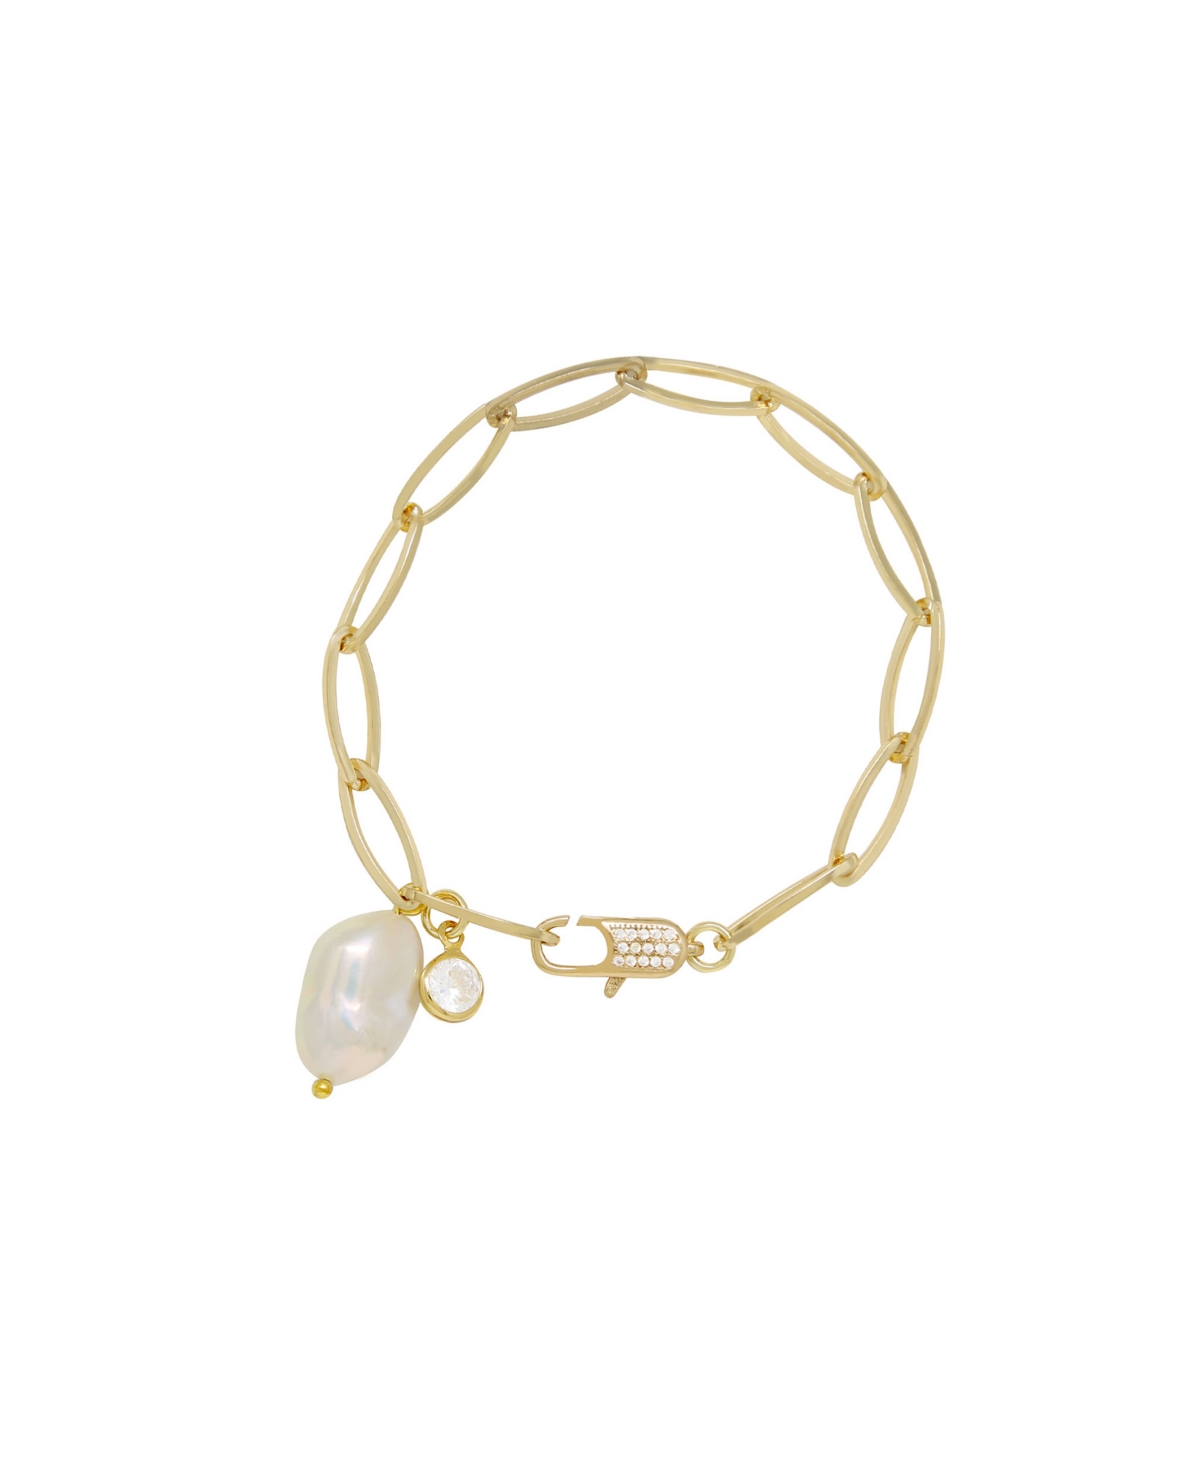 Gold Plated Paperclip Chain Bracelet with Pearl - Gold Plated